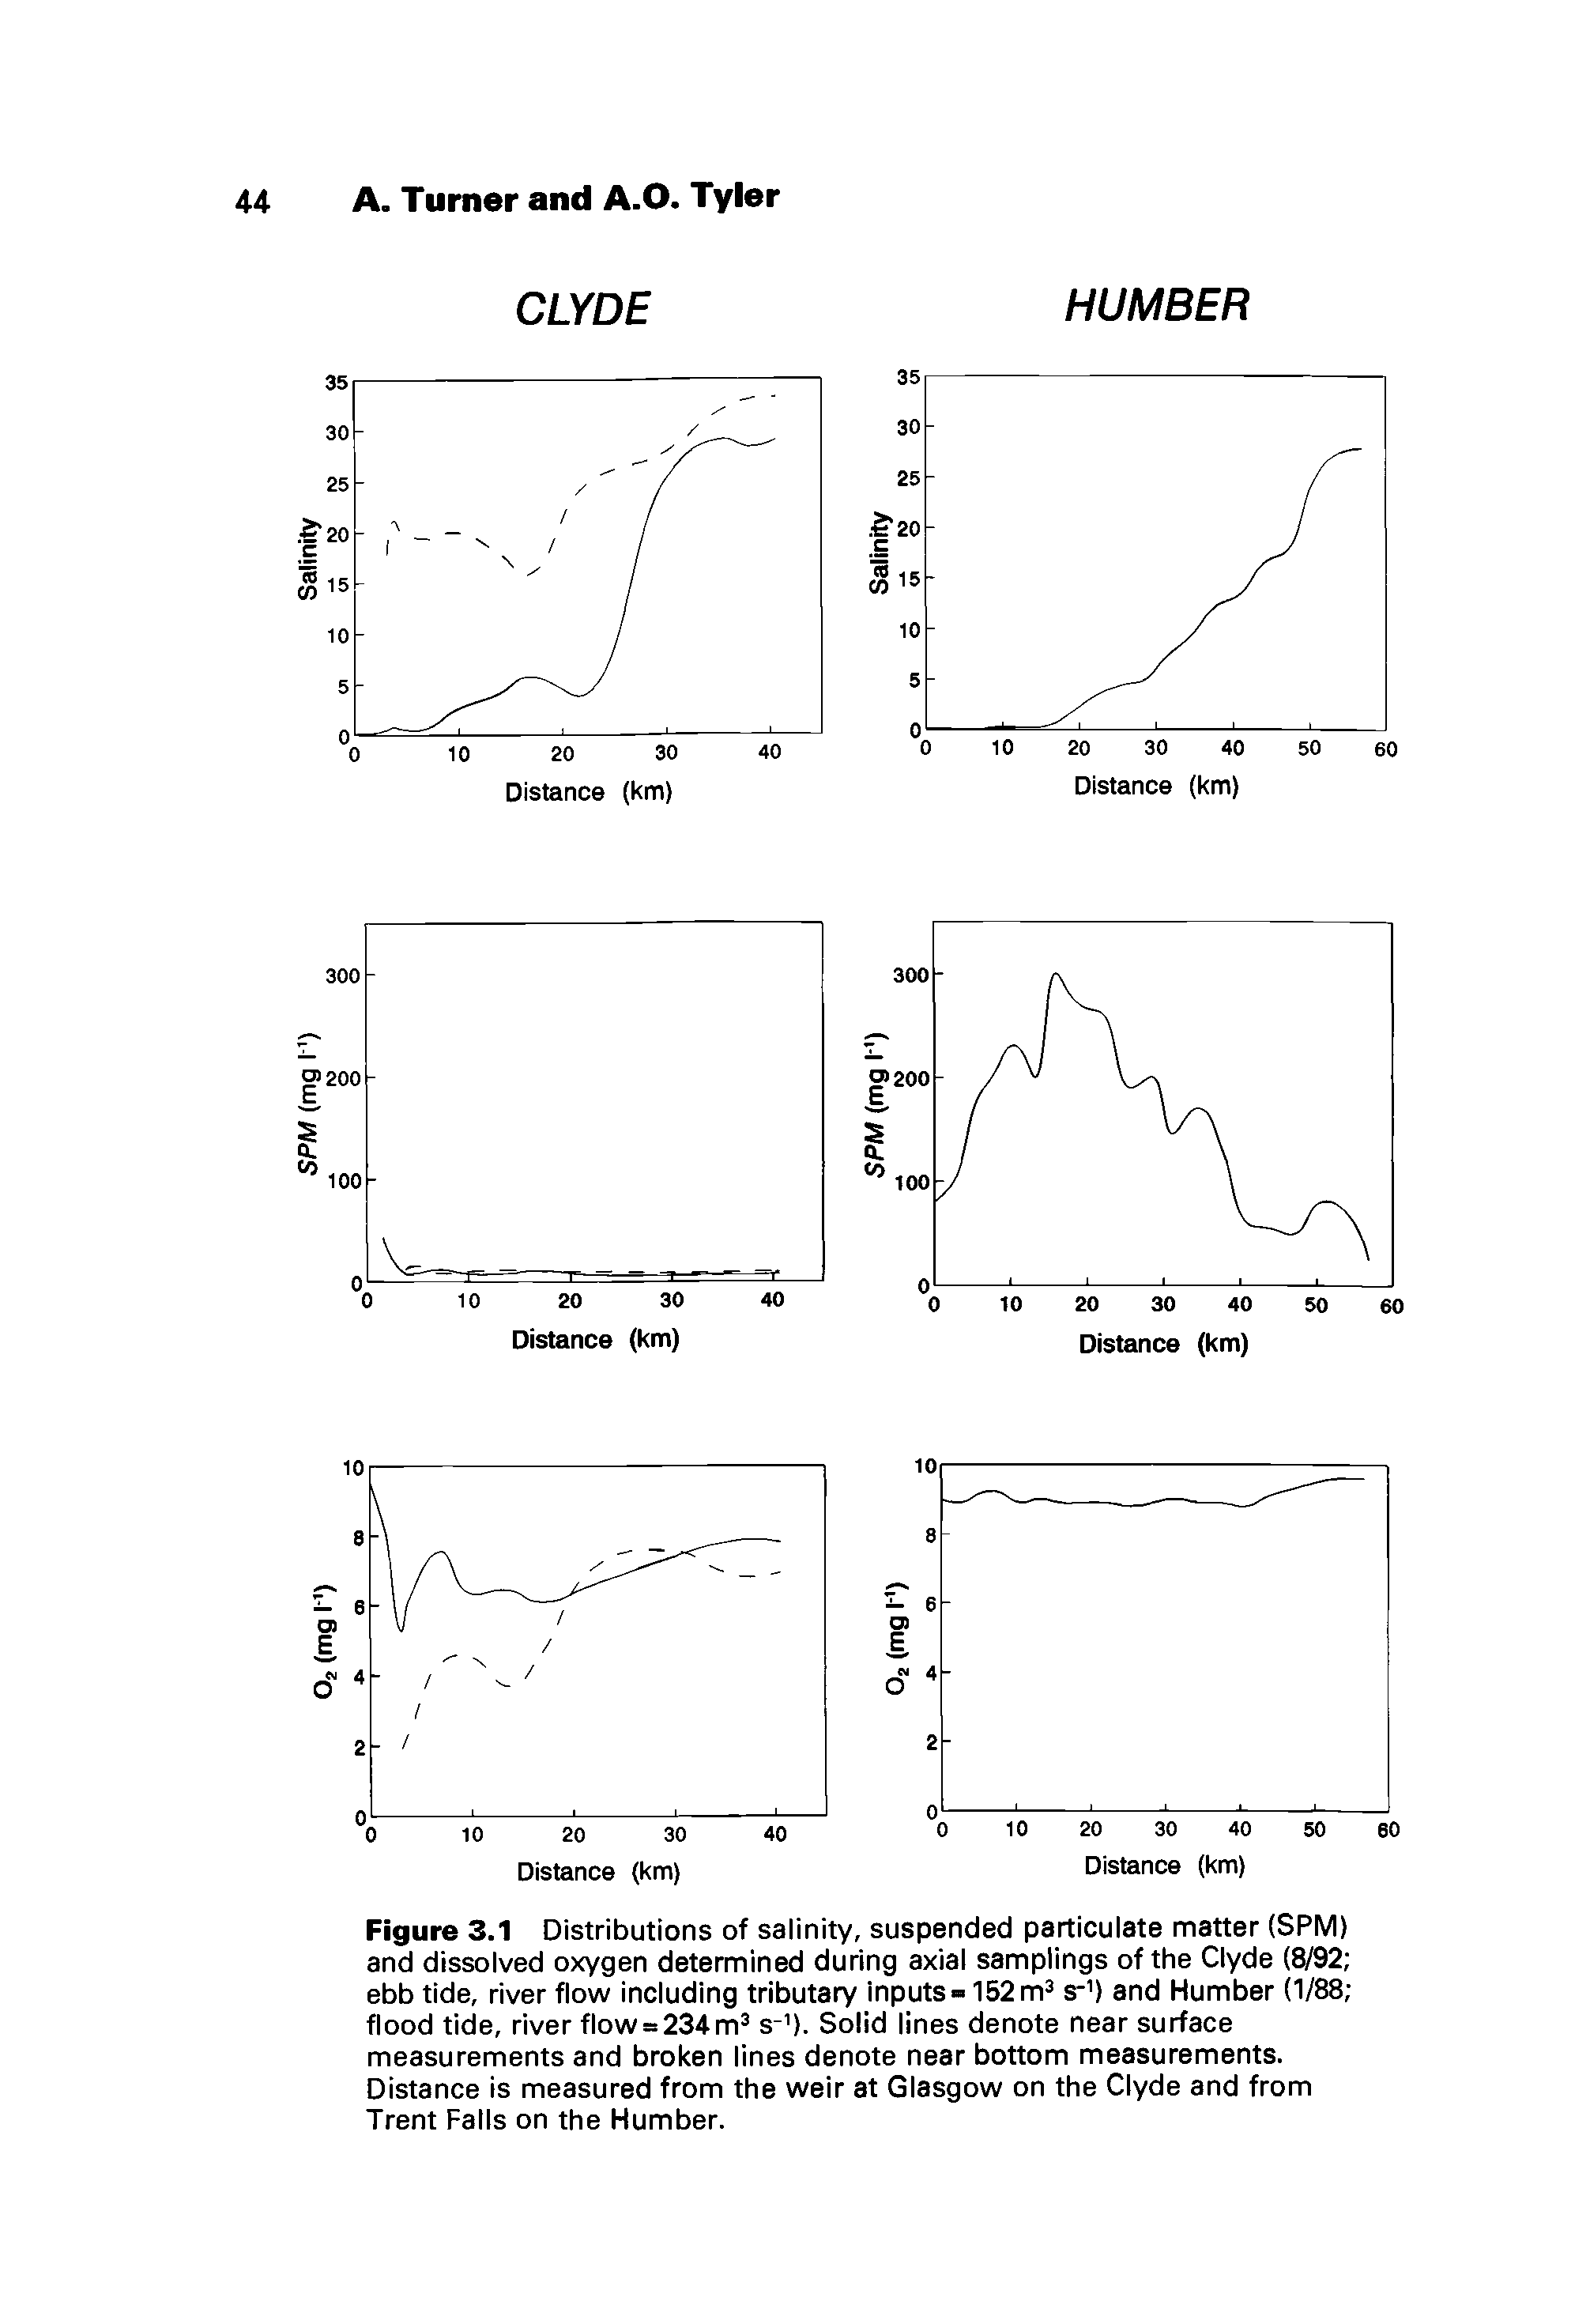 Figure 3.1 Distributions of salinity, suspended particulate matter (SPM) and dissolved oxygen determined during axial samplings of the Clyde (8/92 ebb tide, river flow including tributary inputs -152 m s ) and Humber (1/88 flood tide, river flow = 234m s- ). Solid lines denote near surface measurements and broken lines denote near bottom measurements. Distance is measured from the weir at Glasgow on the Clyde and from Trent Falls on the Humber.